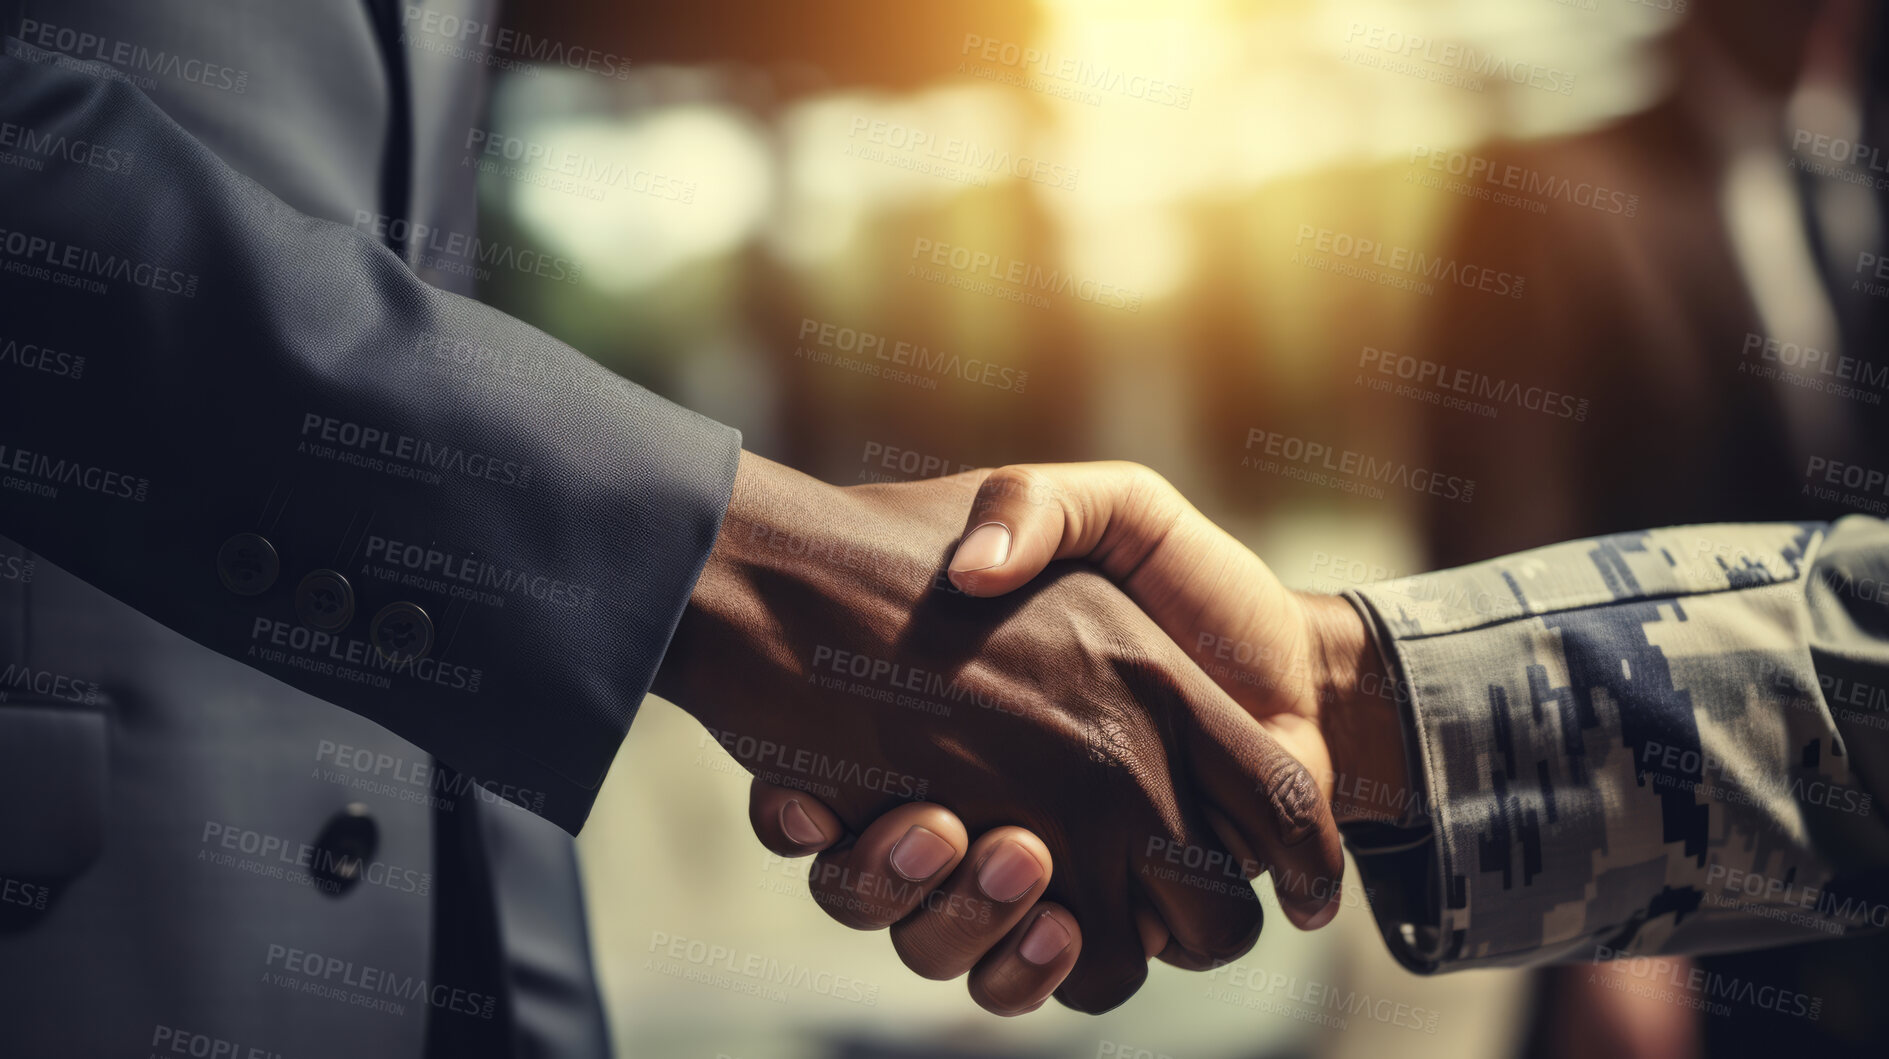 Buy stock photo Close-up handshake between soldier and business or politician.